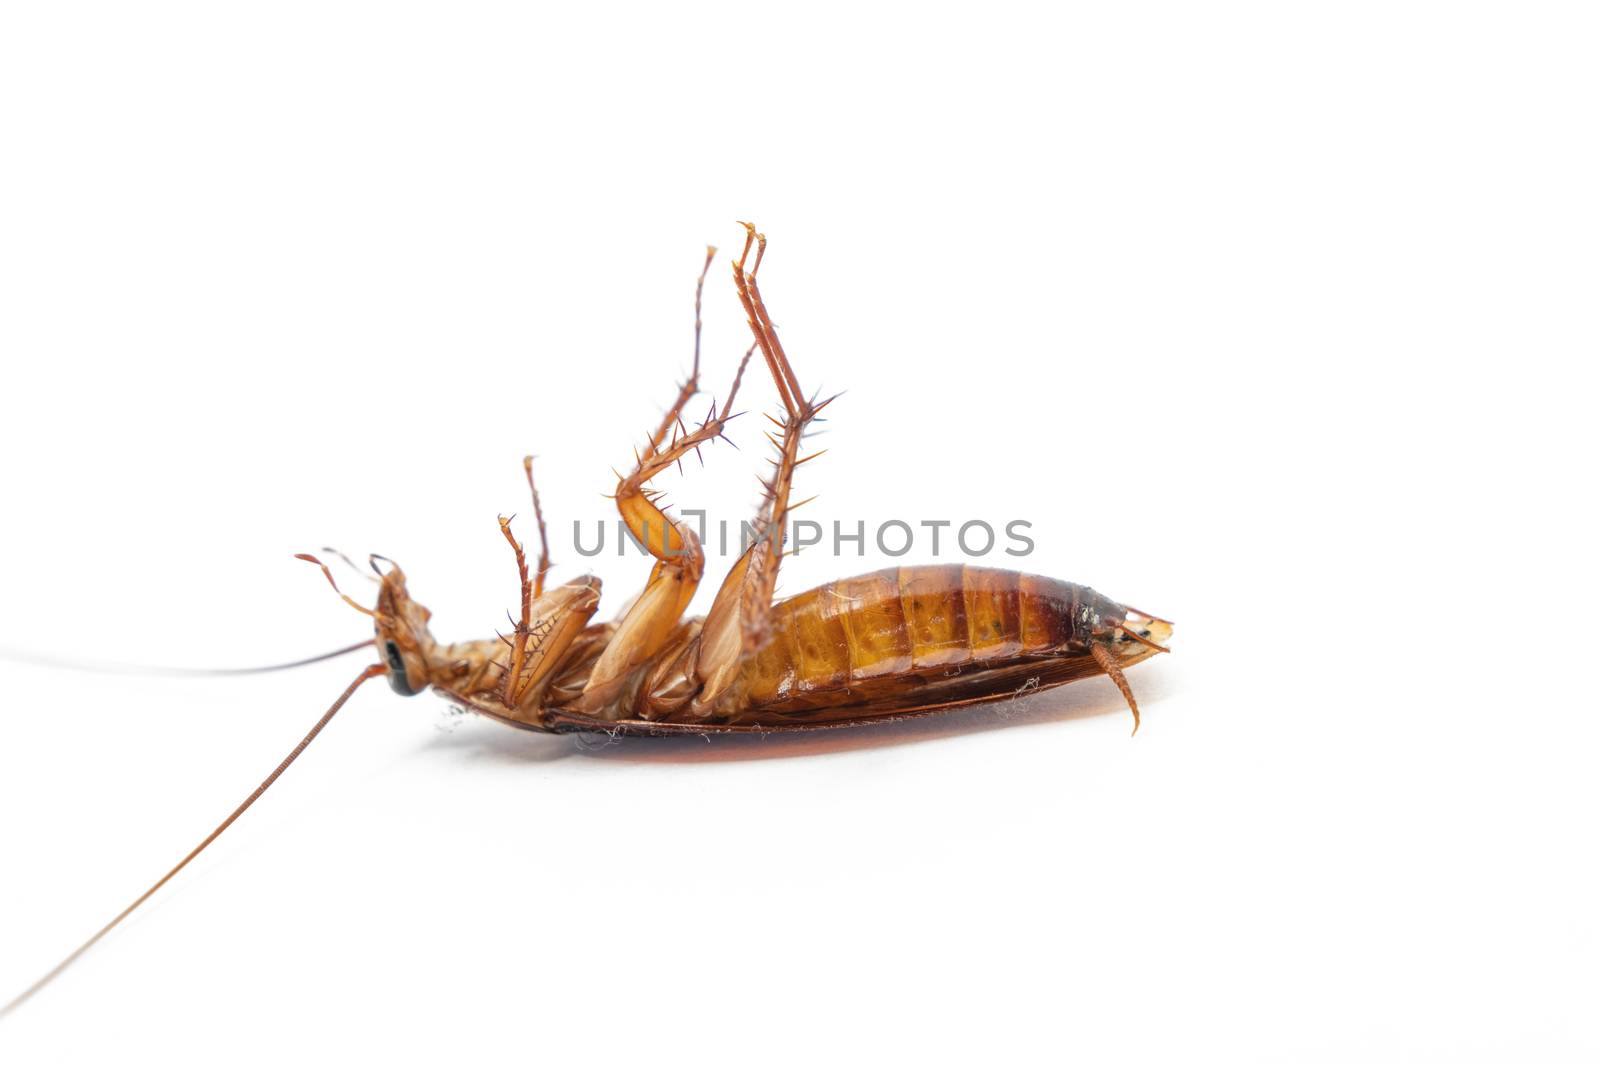 A Dead cockroach on white background, Concept the problem in the house because of cockroaches living in the kitchen and pest control, using poisonous spray to kill cockroach at home, Top view